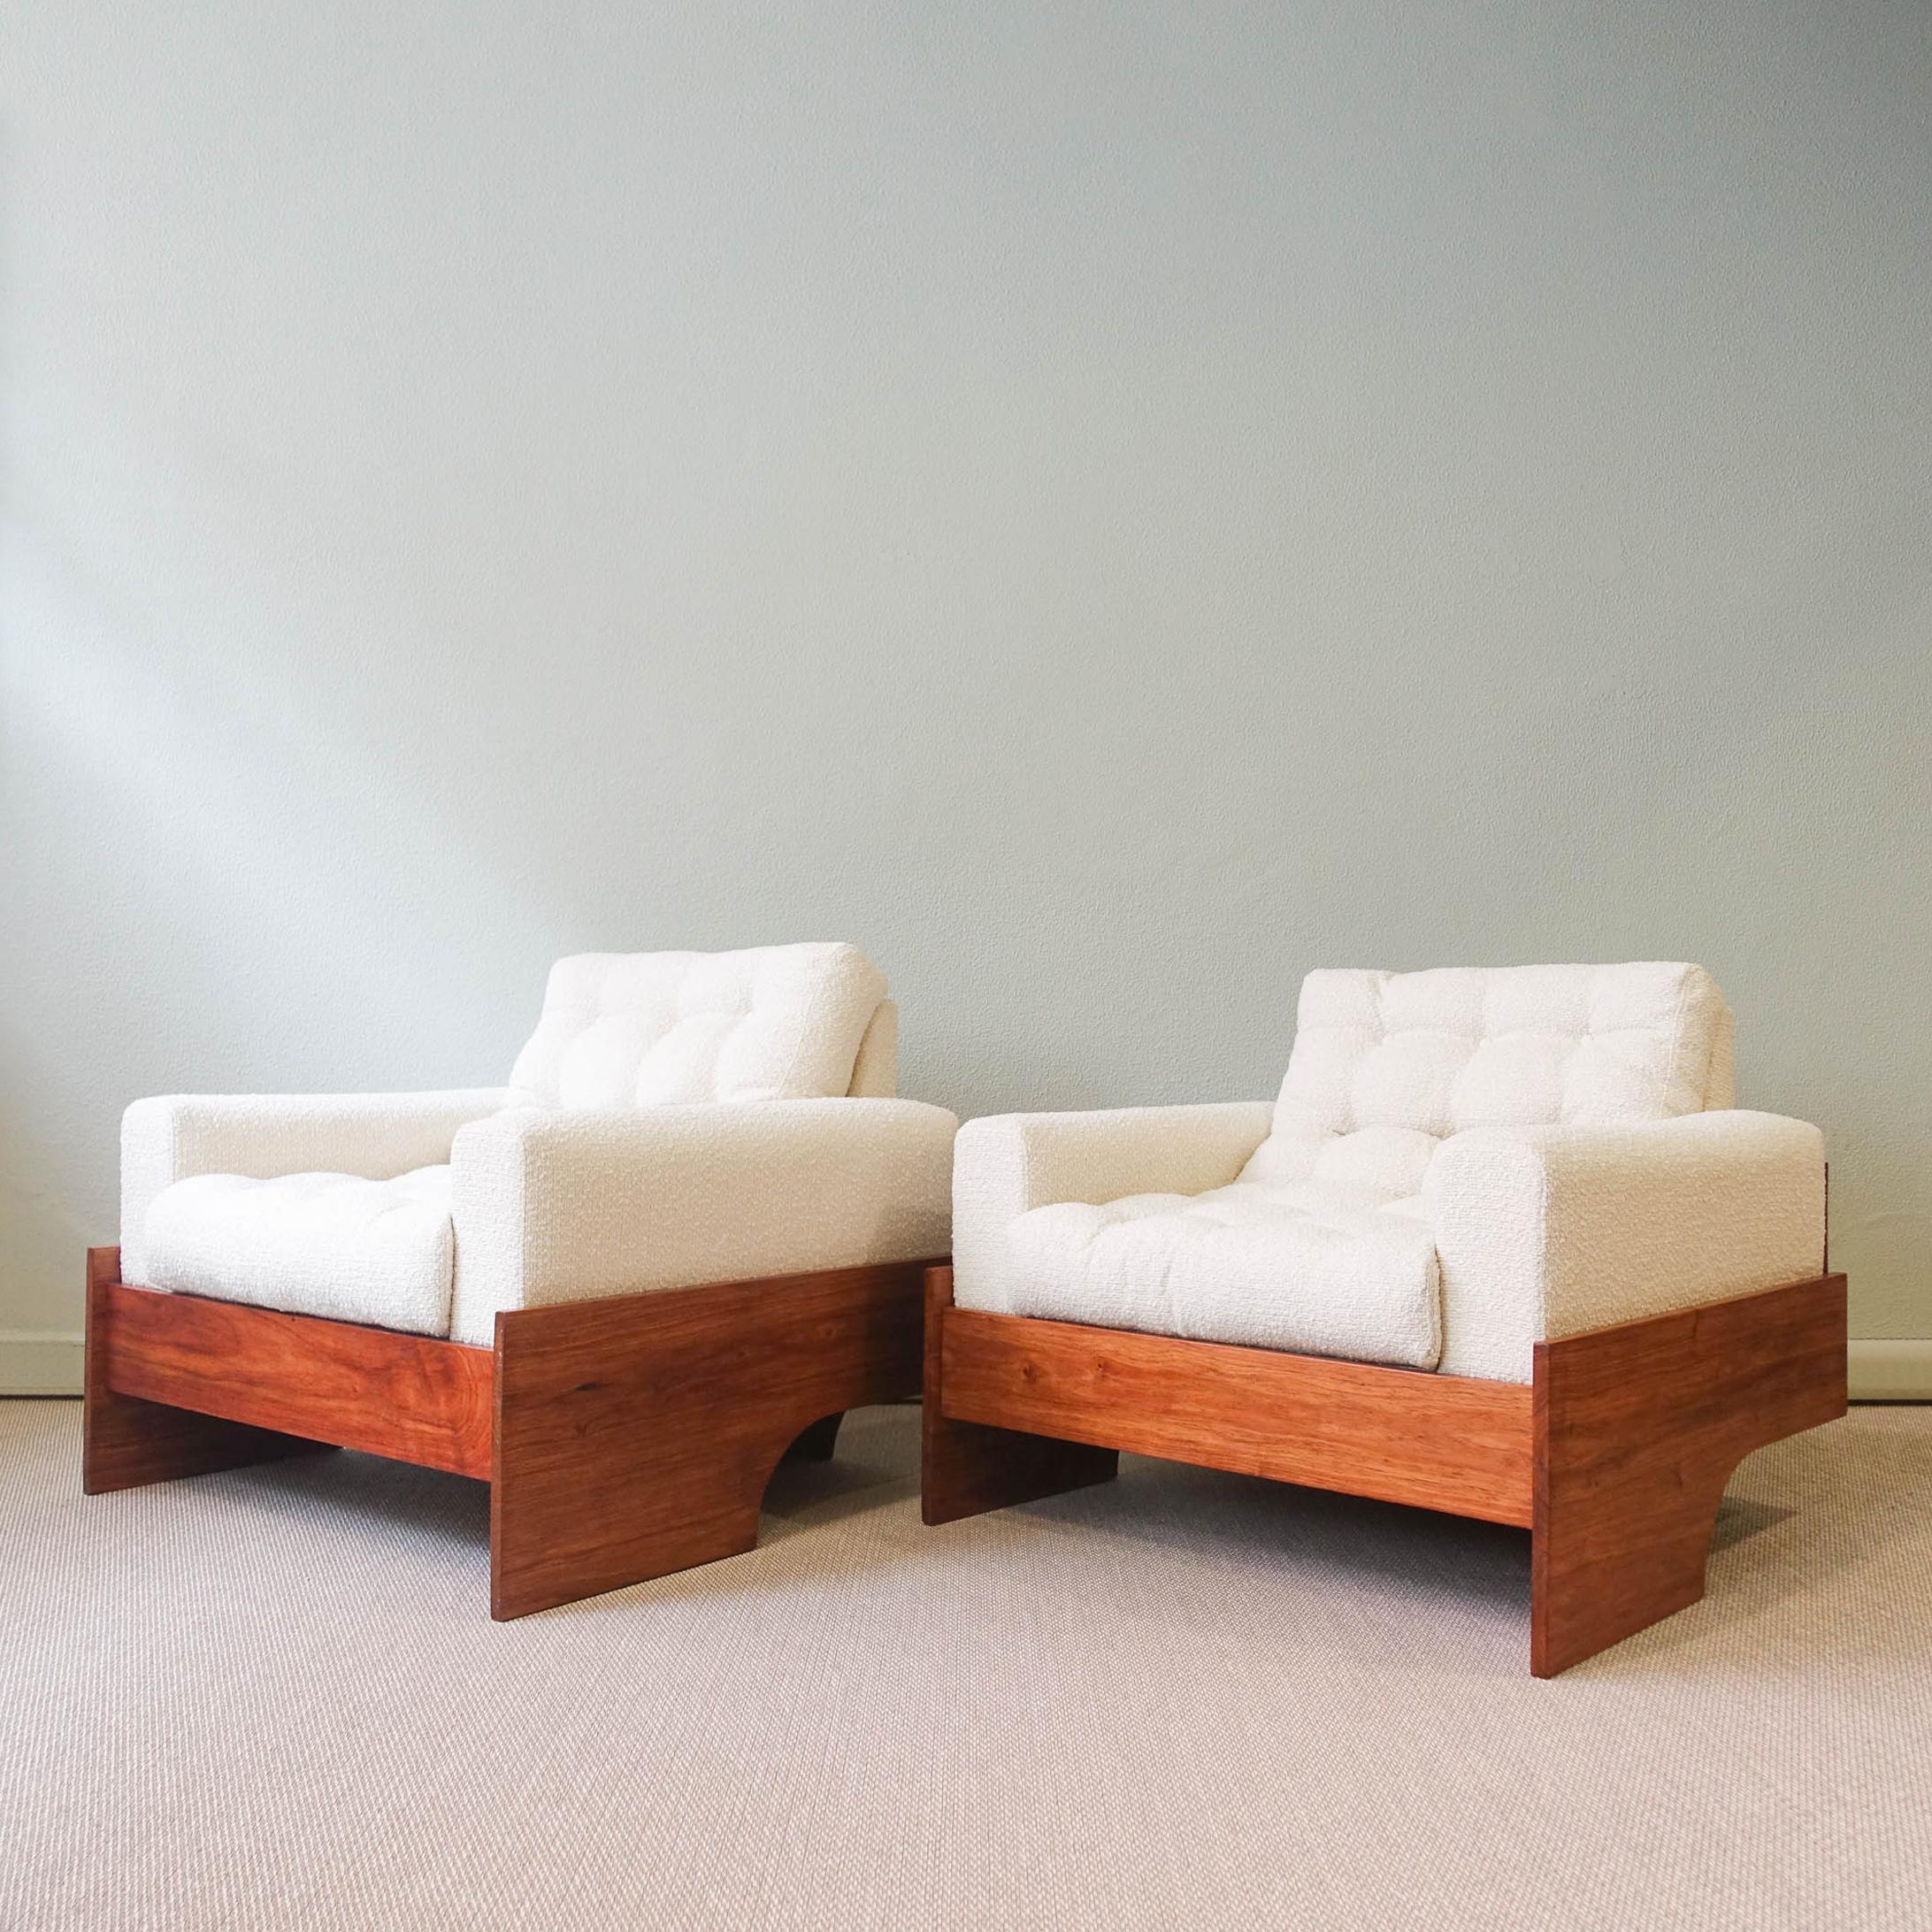 This pair of lounge chairs, in the style of Jorge Zalszupin, was produced in Brazil, during the 1960's. This lounge chairs have a mutenye wood structure with very simple lines, were the each seat fits. The wood structure was completely restored and